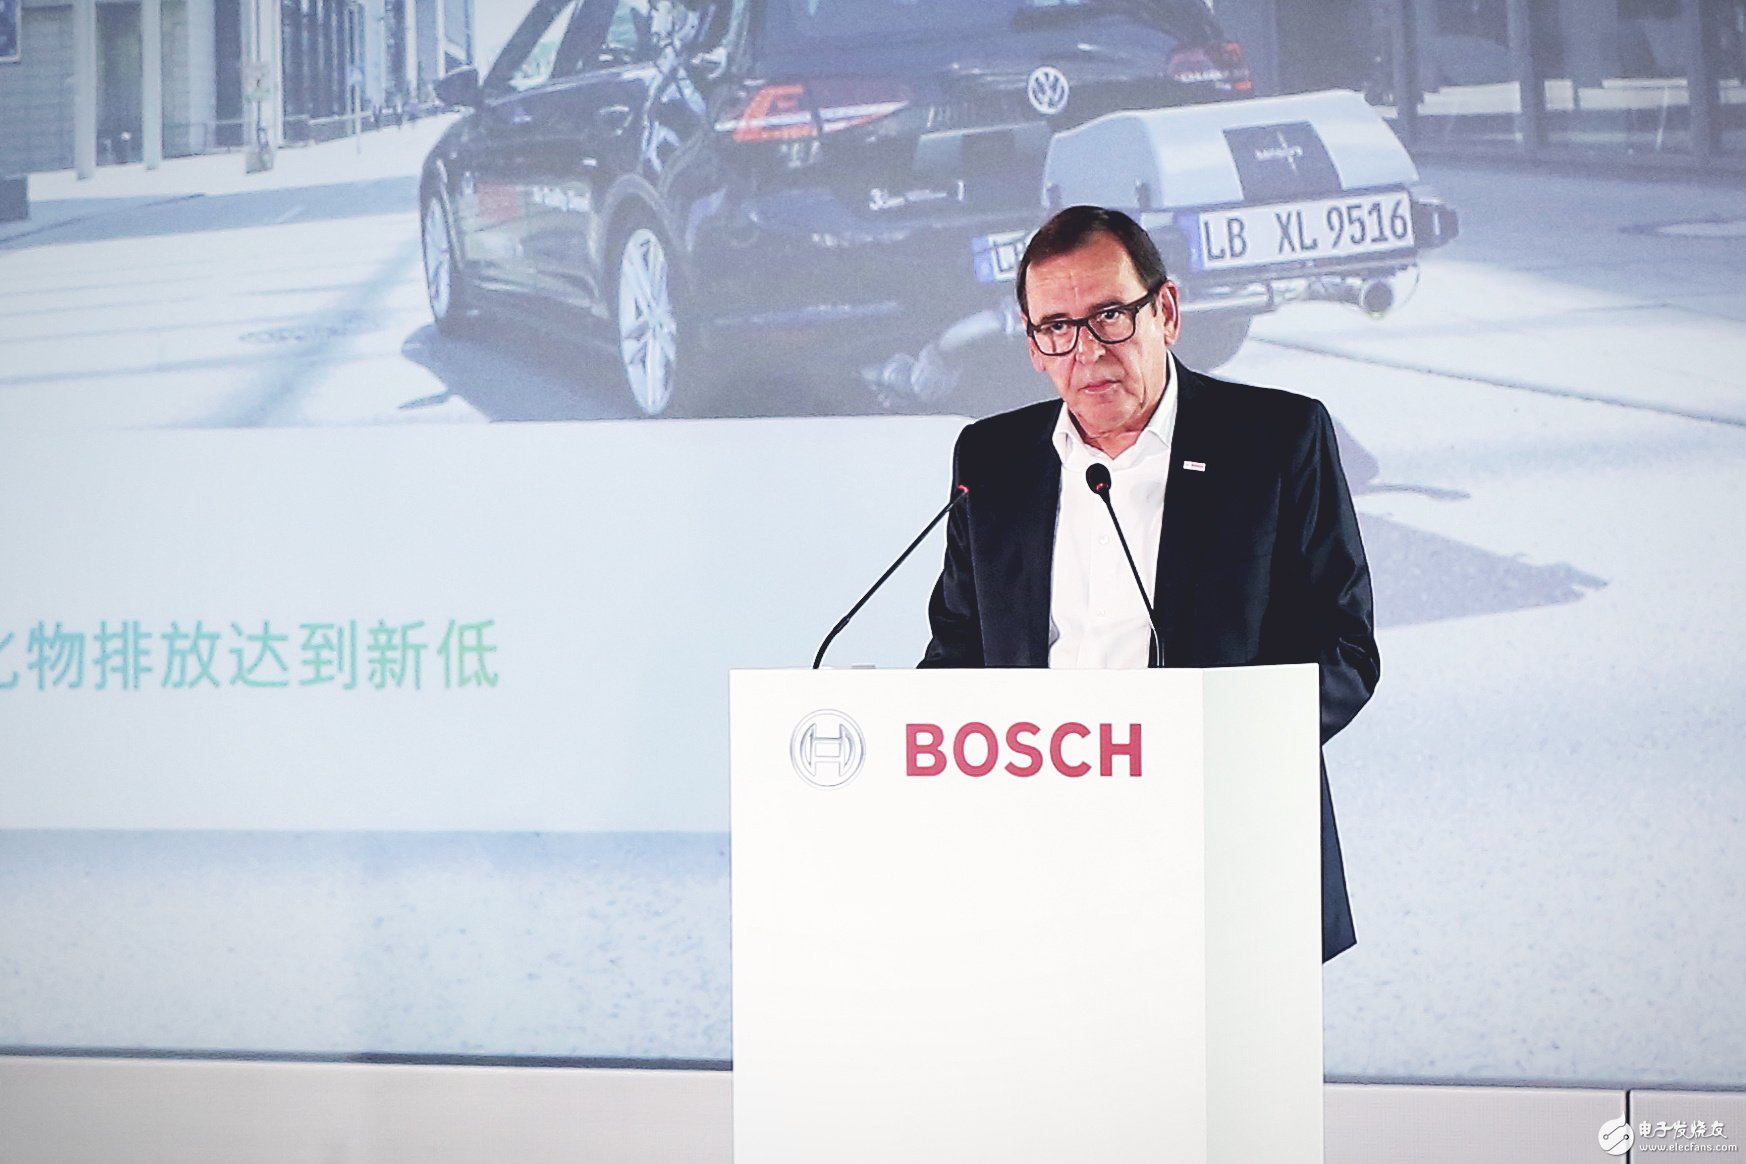 Bosch announced that its sales exceeded 100 billion for the first time. In the future, it will continue to invest in the local market and accelerate the layout of the Internet of Things in China.